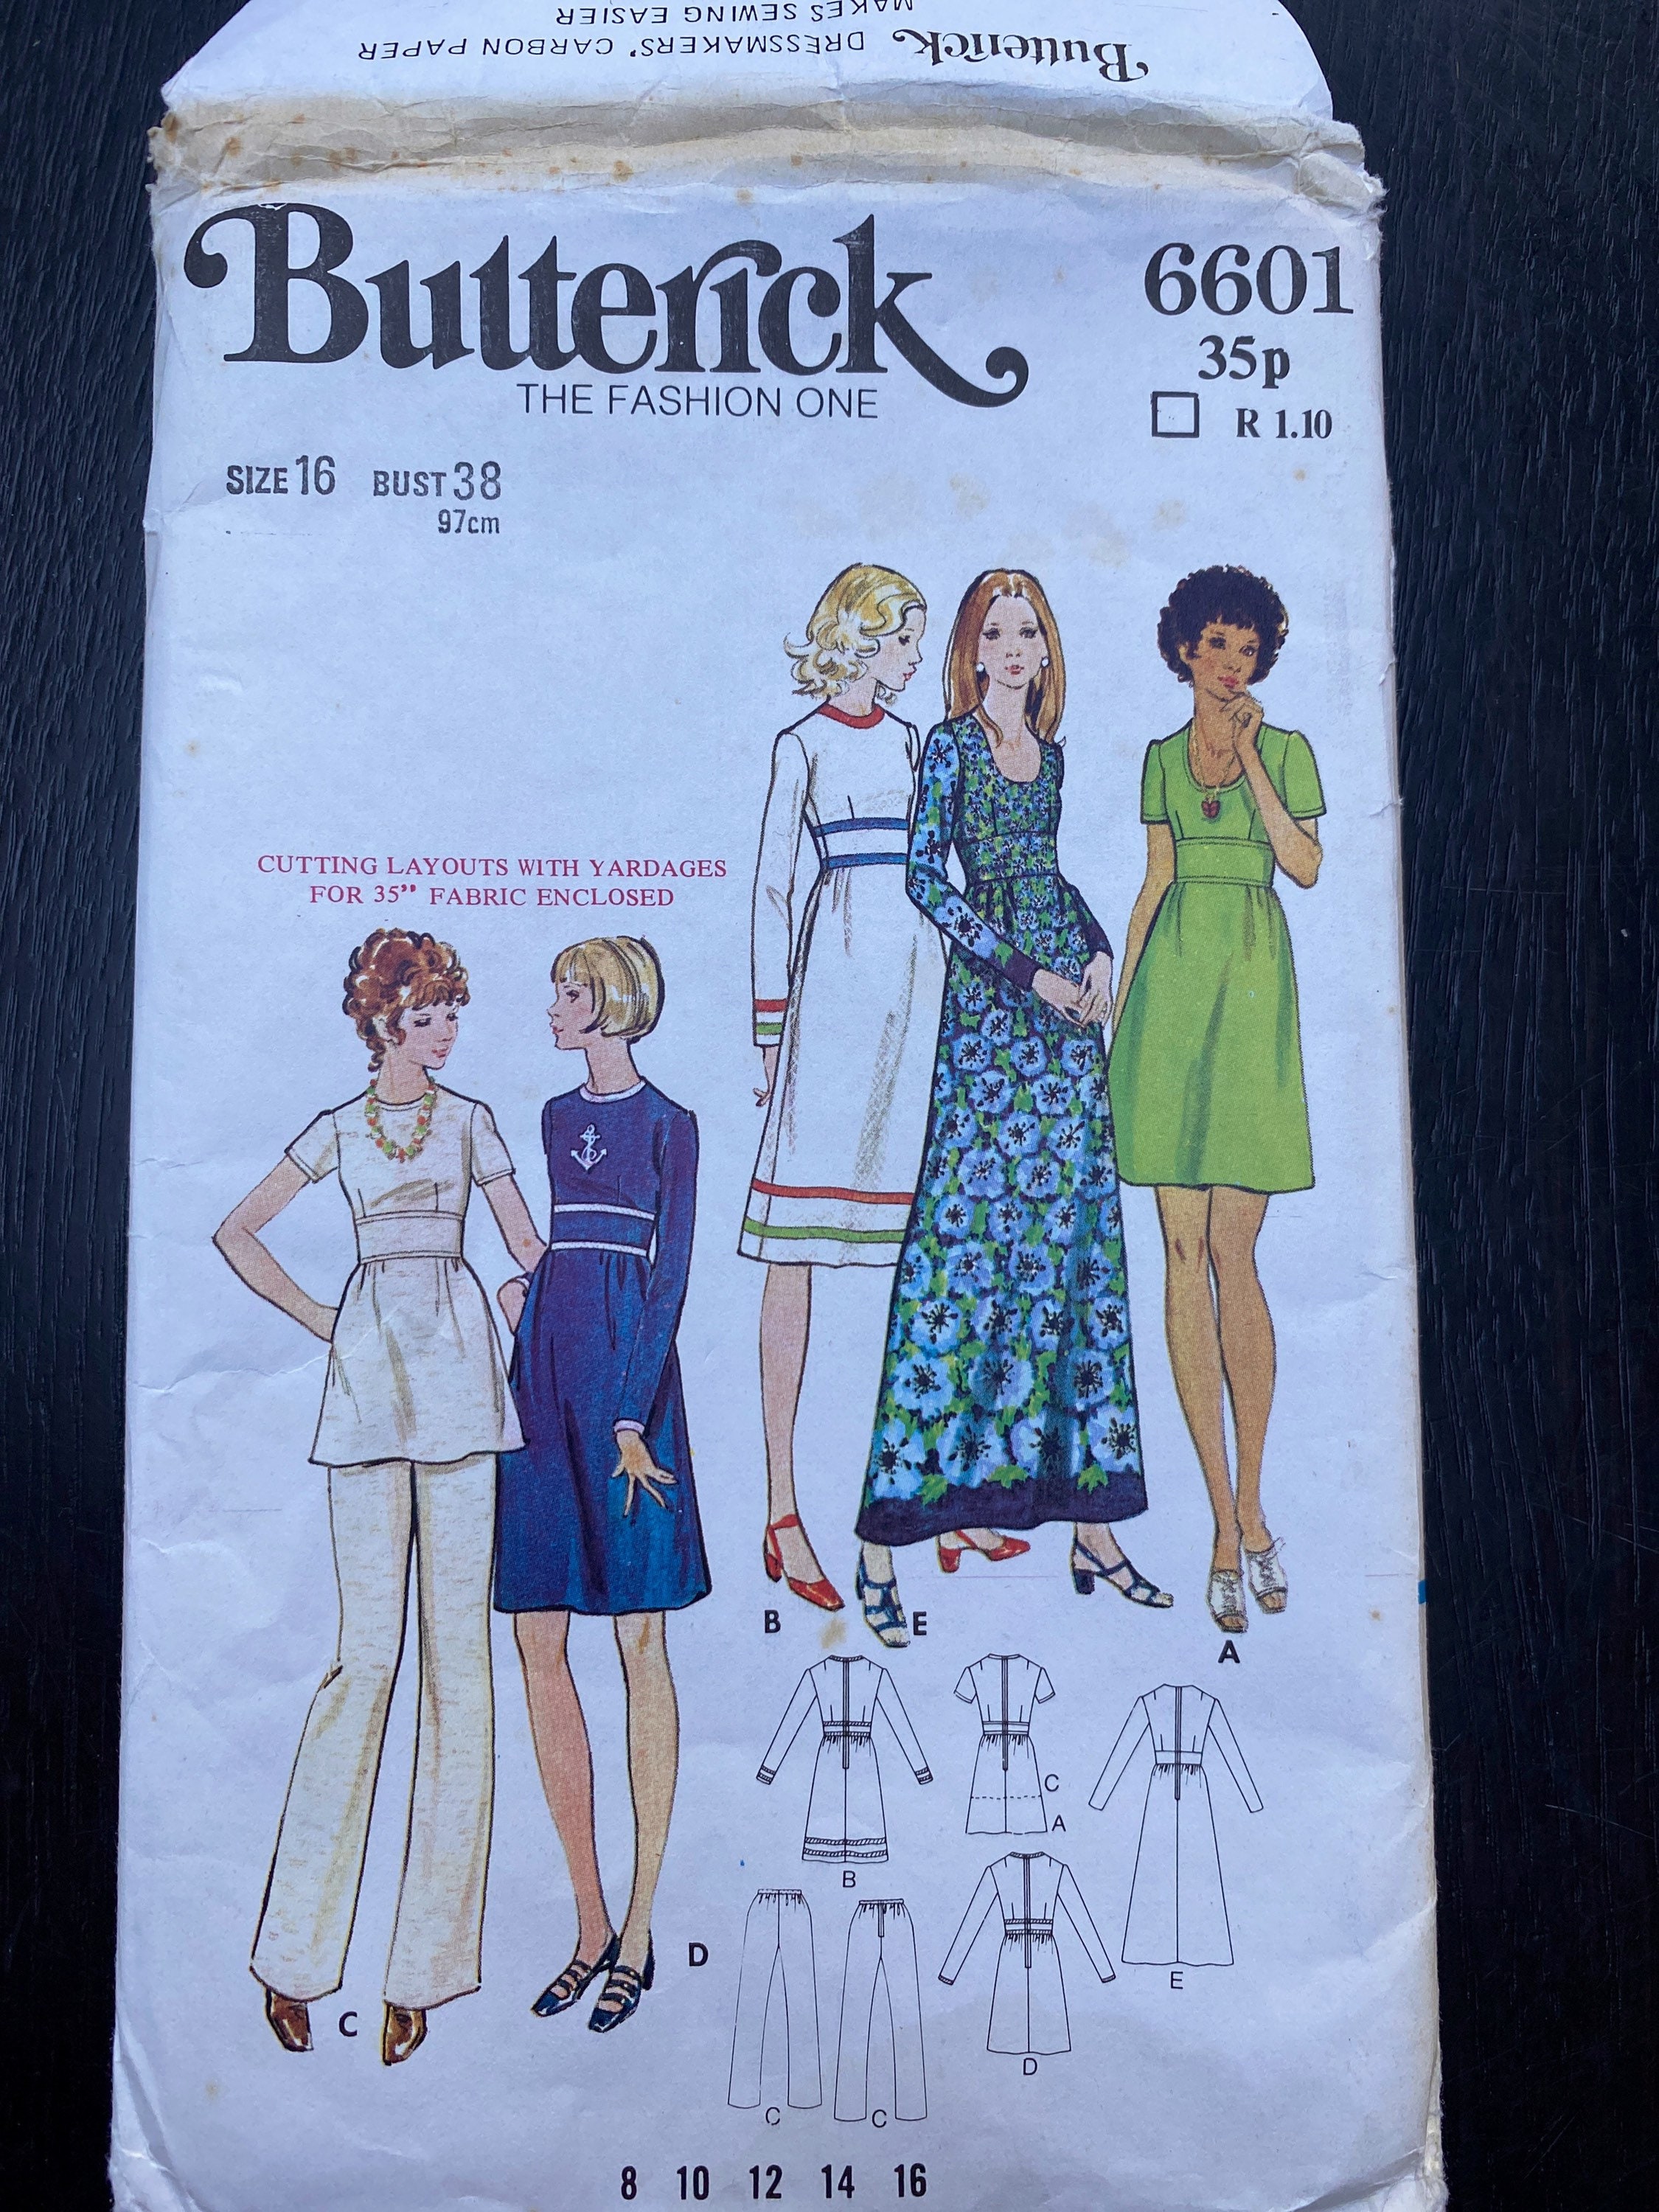 Vintage 1970's Wrap Tunic Top and Pants Pattern---Simplicity 5138---Size 12  Bust 34  UNCUT and Factory Folded